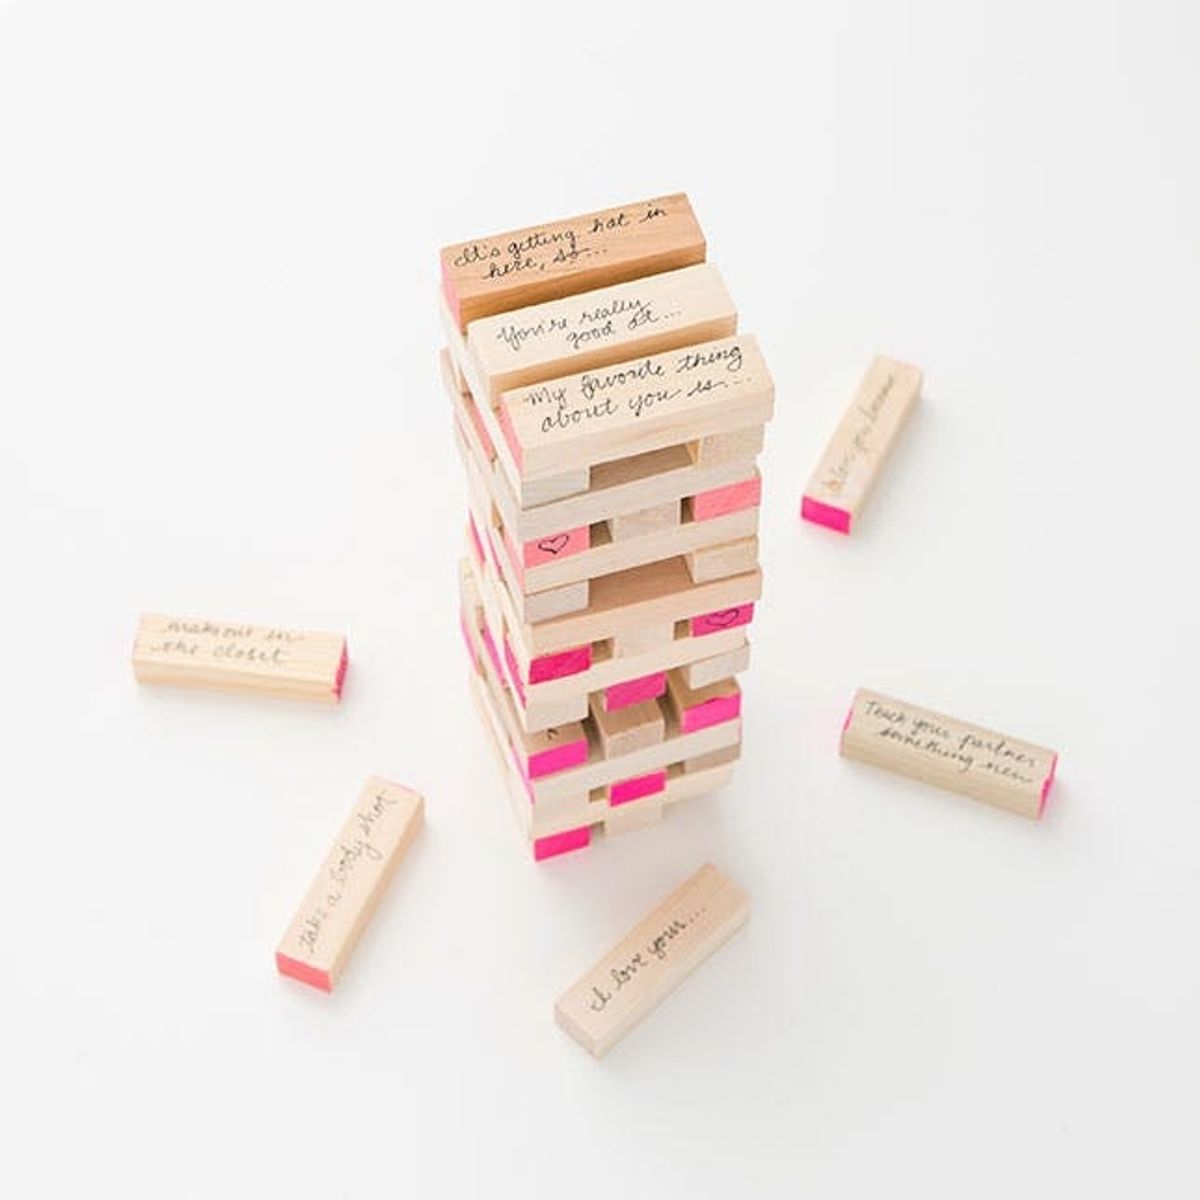 Spice Up Your Valentine’s Day With DIY Date Night Jenga